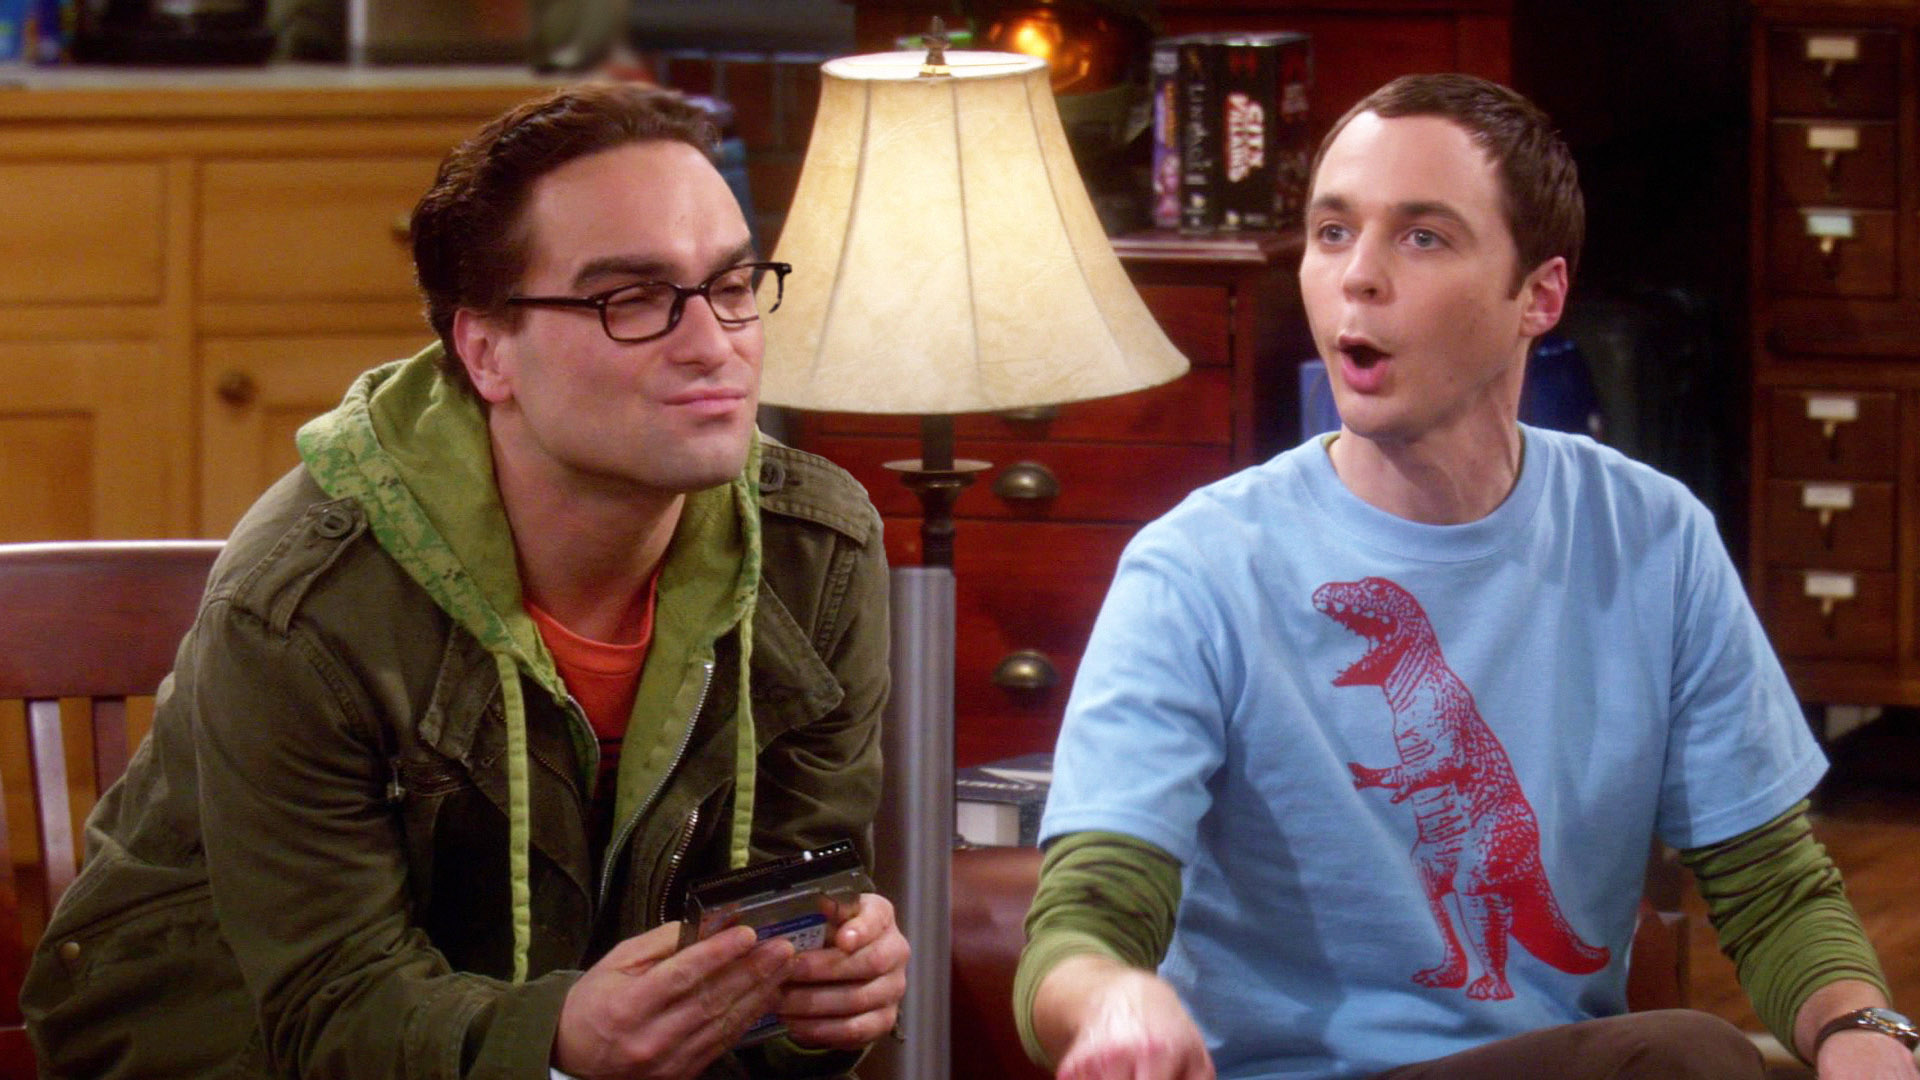 The Big Bang Theory Audition Brie Larson Wants to Forget (But We Won't Let Her)